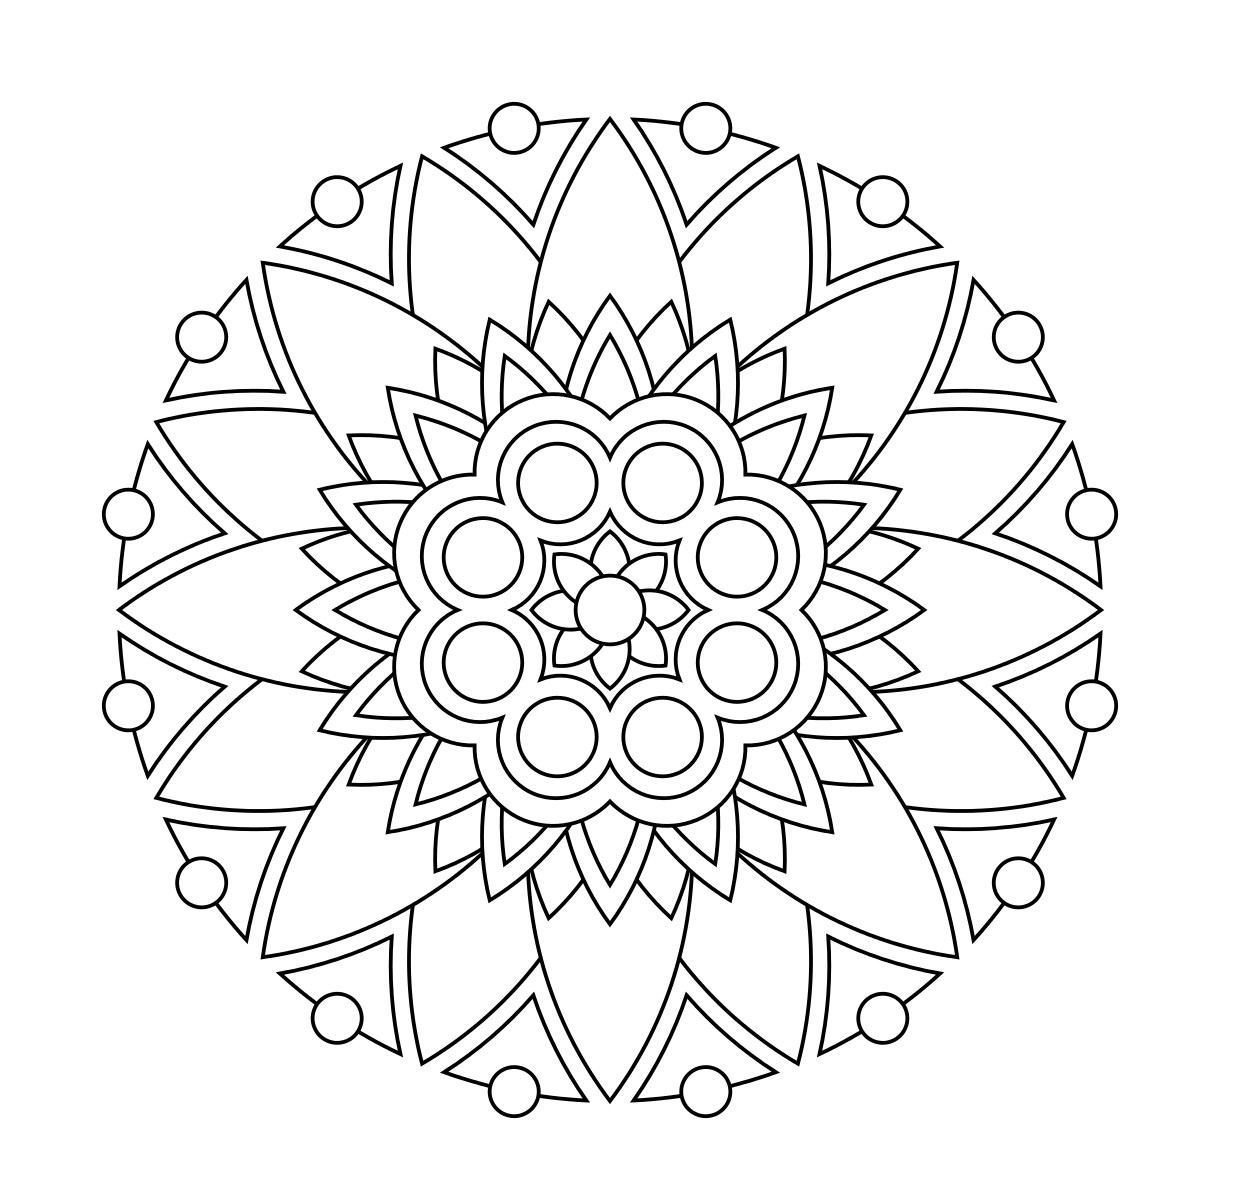 520 Meditation Coloring Pages Pdf For Free